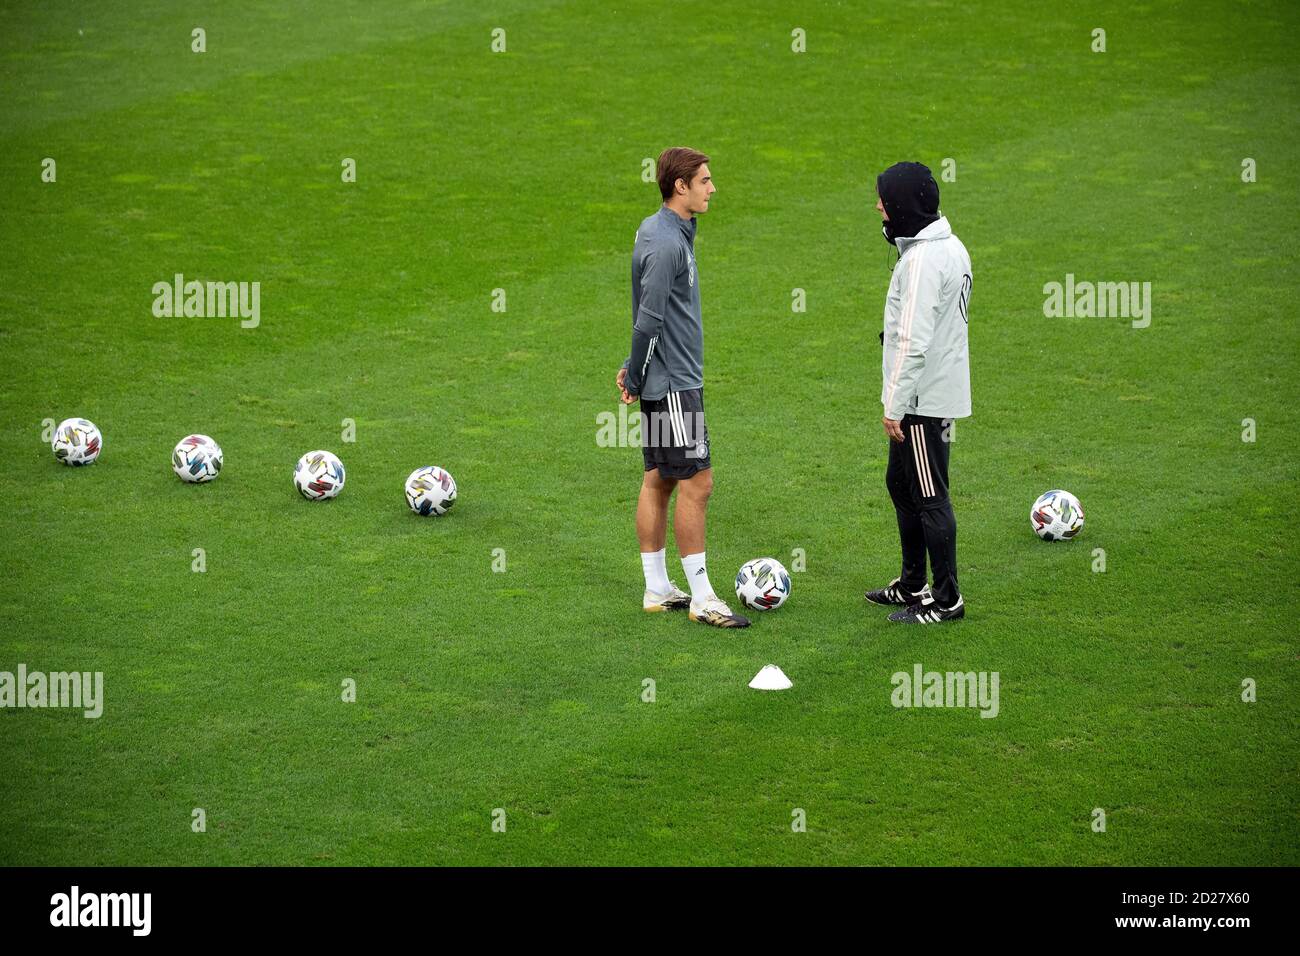 Cologne, Germany. 06th Oct, 2020. Football: national team, the day before the international test match against Turkey. National coach Joachim Löw (r) talks to Florian Neuhaus during the training of the national team in the RheinEnergie stadium. Credit: Federico Gambarini/dpa - IMPORTANT NOTE: In accordance with the regulations of the DFL Deutsche Fußball Liga and the DFB Deutscher Fußball-Bund, it is prohibited to exploit or have exploited in the stadium and/or from the game taken photographs in the form of sequence images and/or video-like photo series./dpa/Alamy Live News Stock Photo